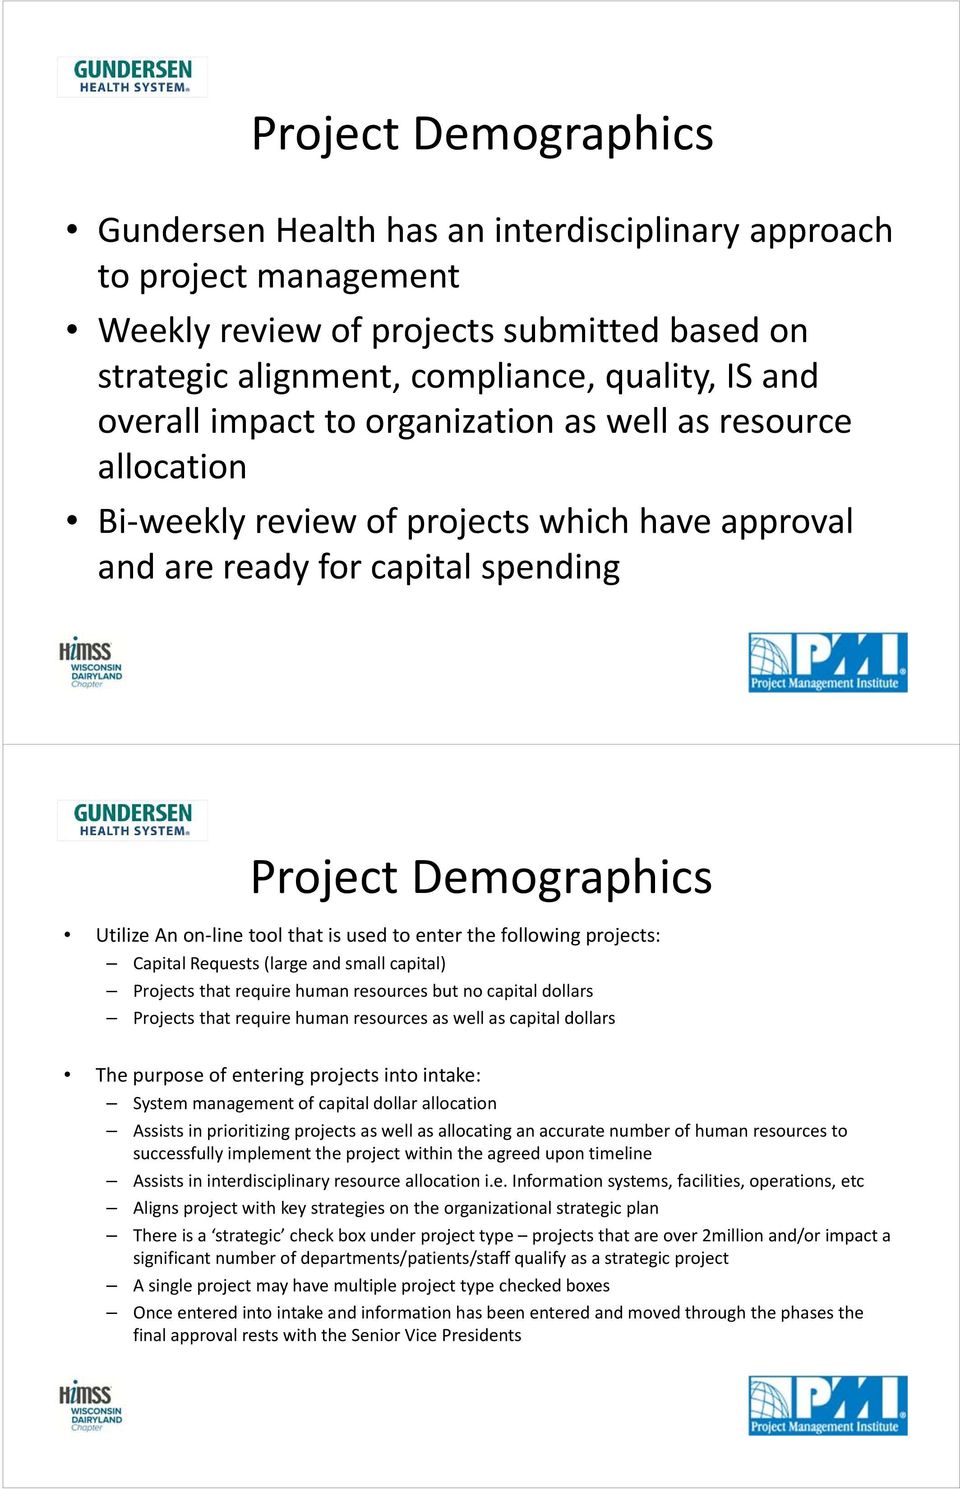 enter the following projects: Capital Requests (large and small capital) Projects that require human resources but no capital dollars Projects that require human resources as well as capital dollars